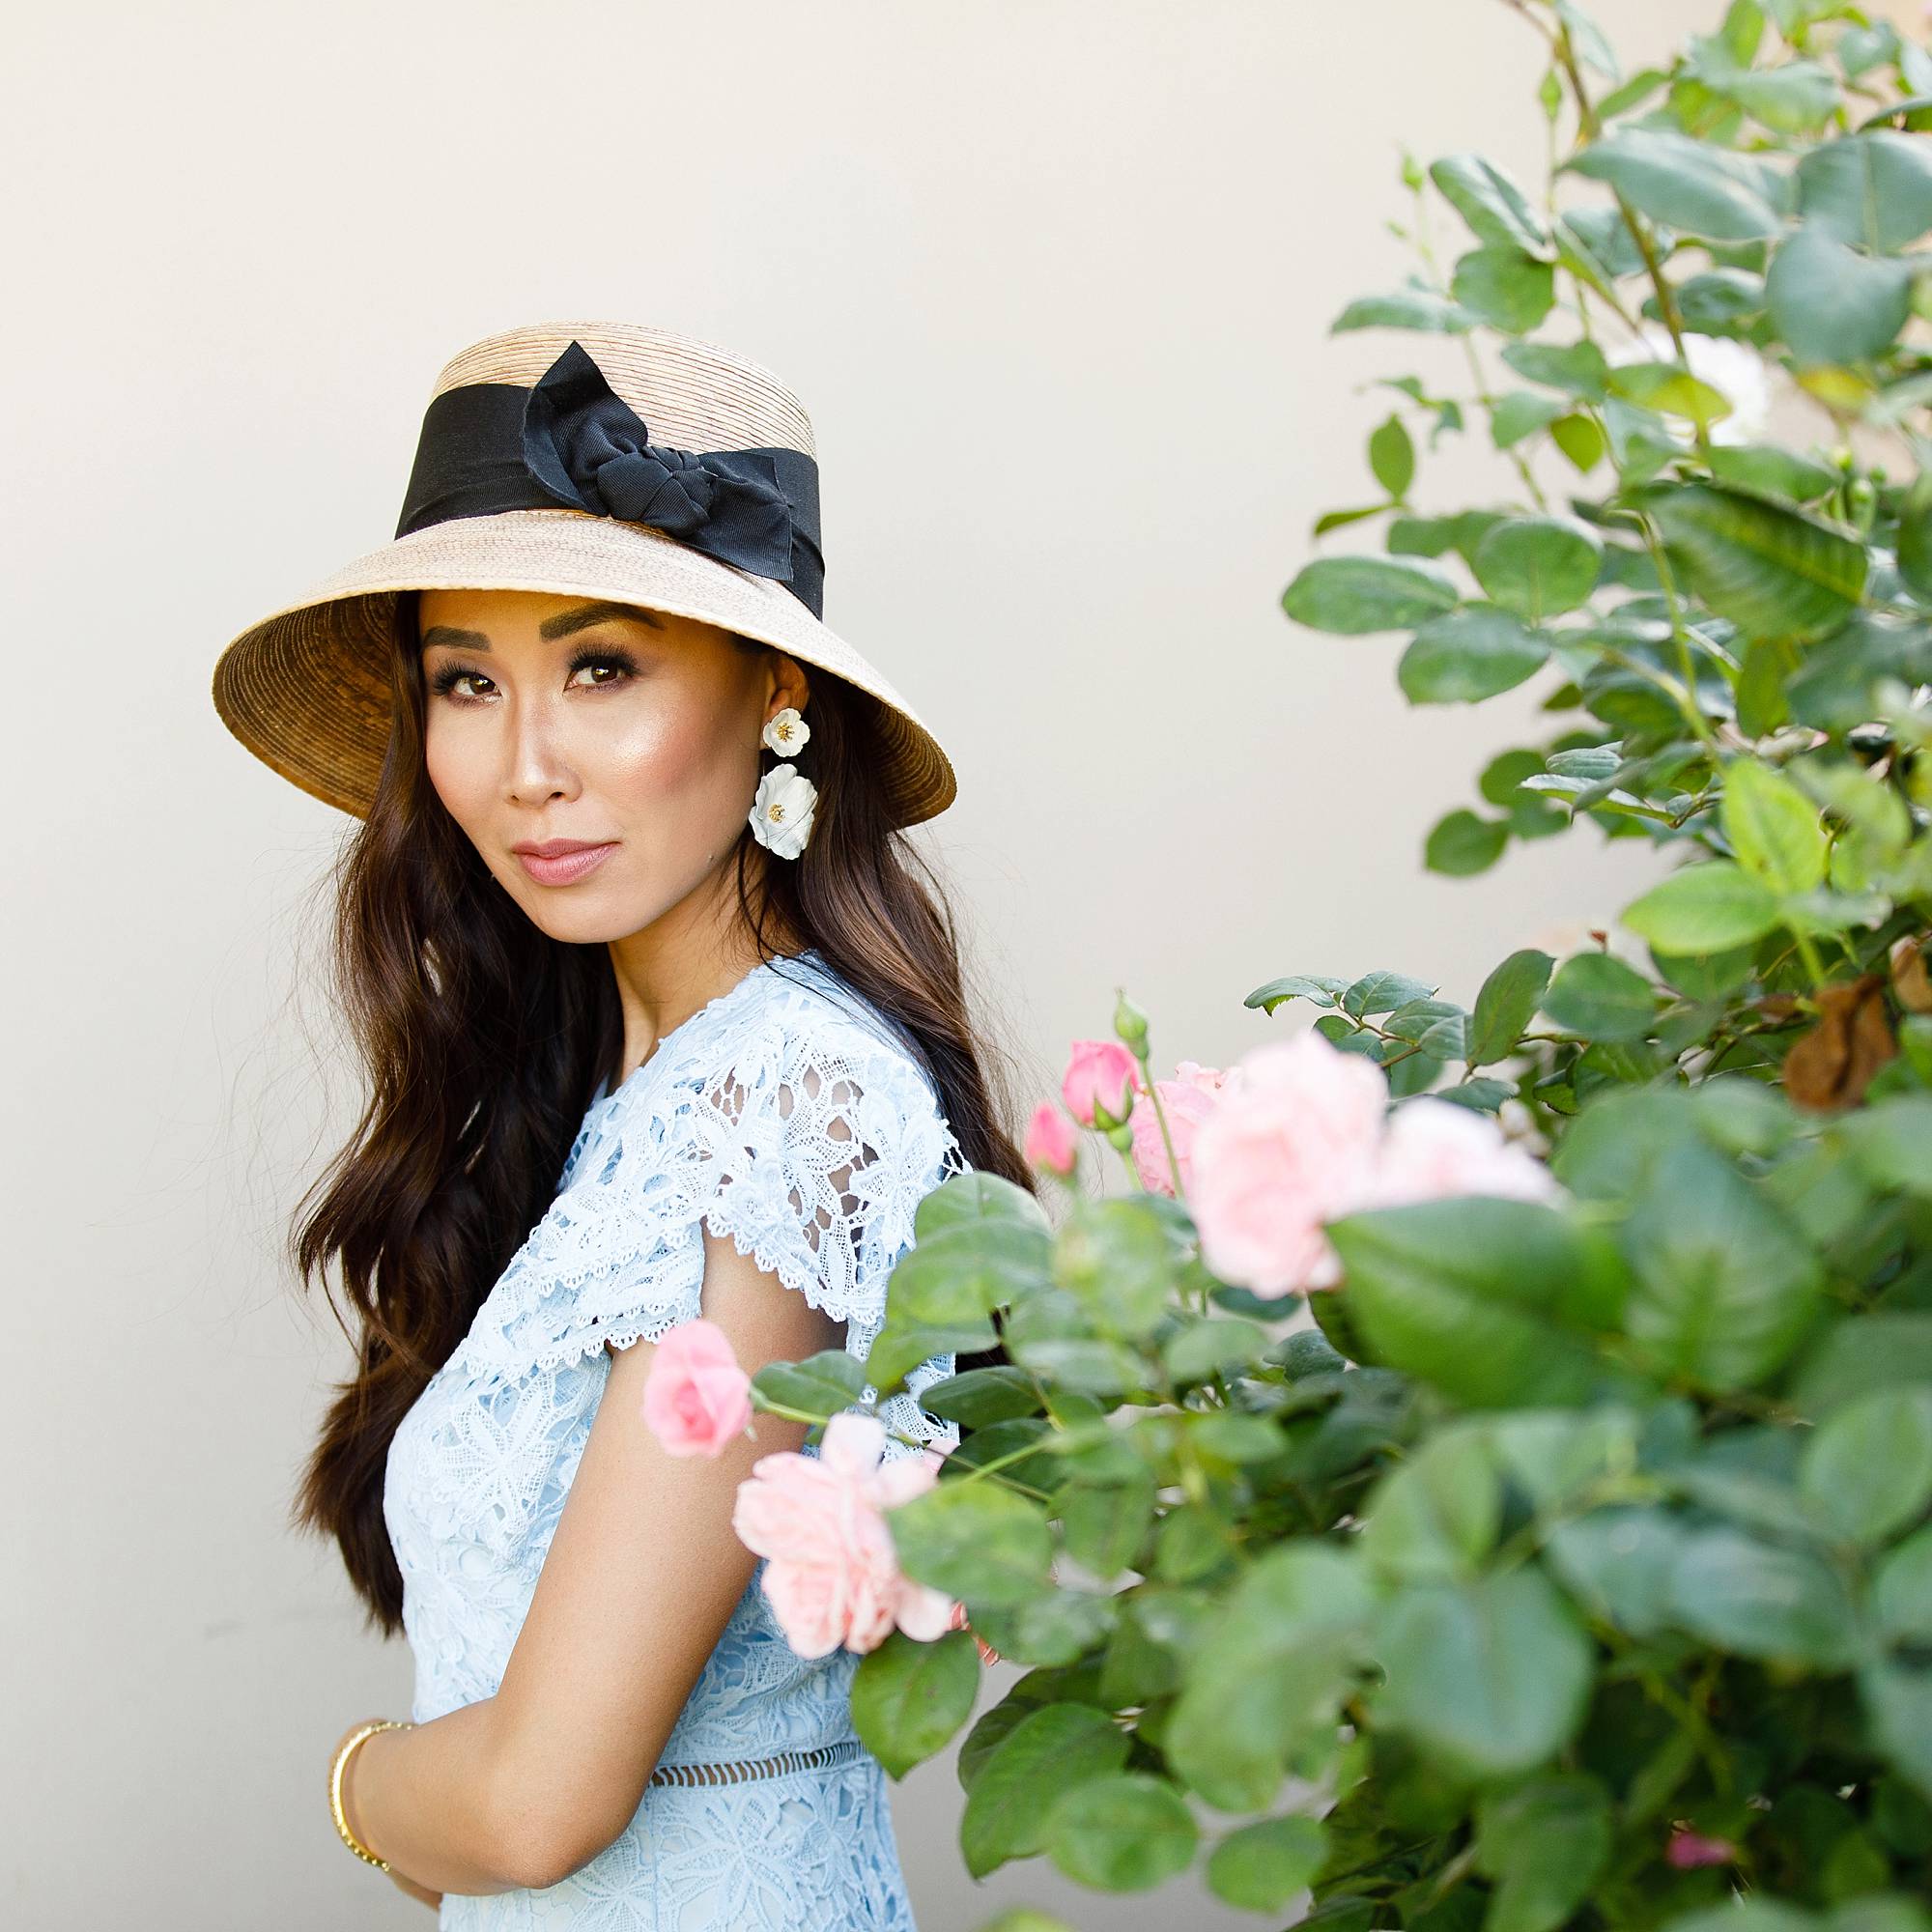 blue lace dress with garden hat from terrain nestled between pink roses against the wall - lifestyle blogger Diana Elizabeth phoenix scottsdale arizona holding rose